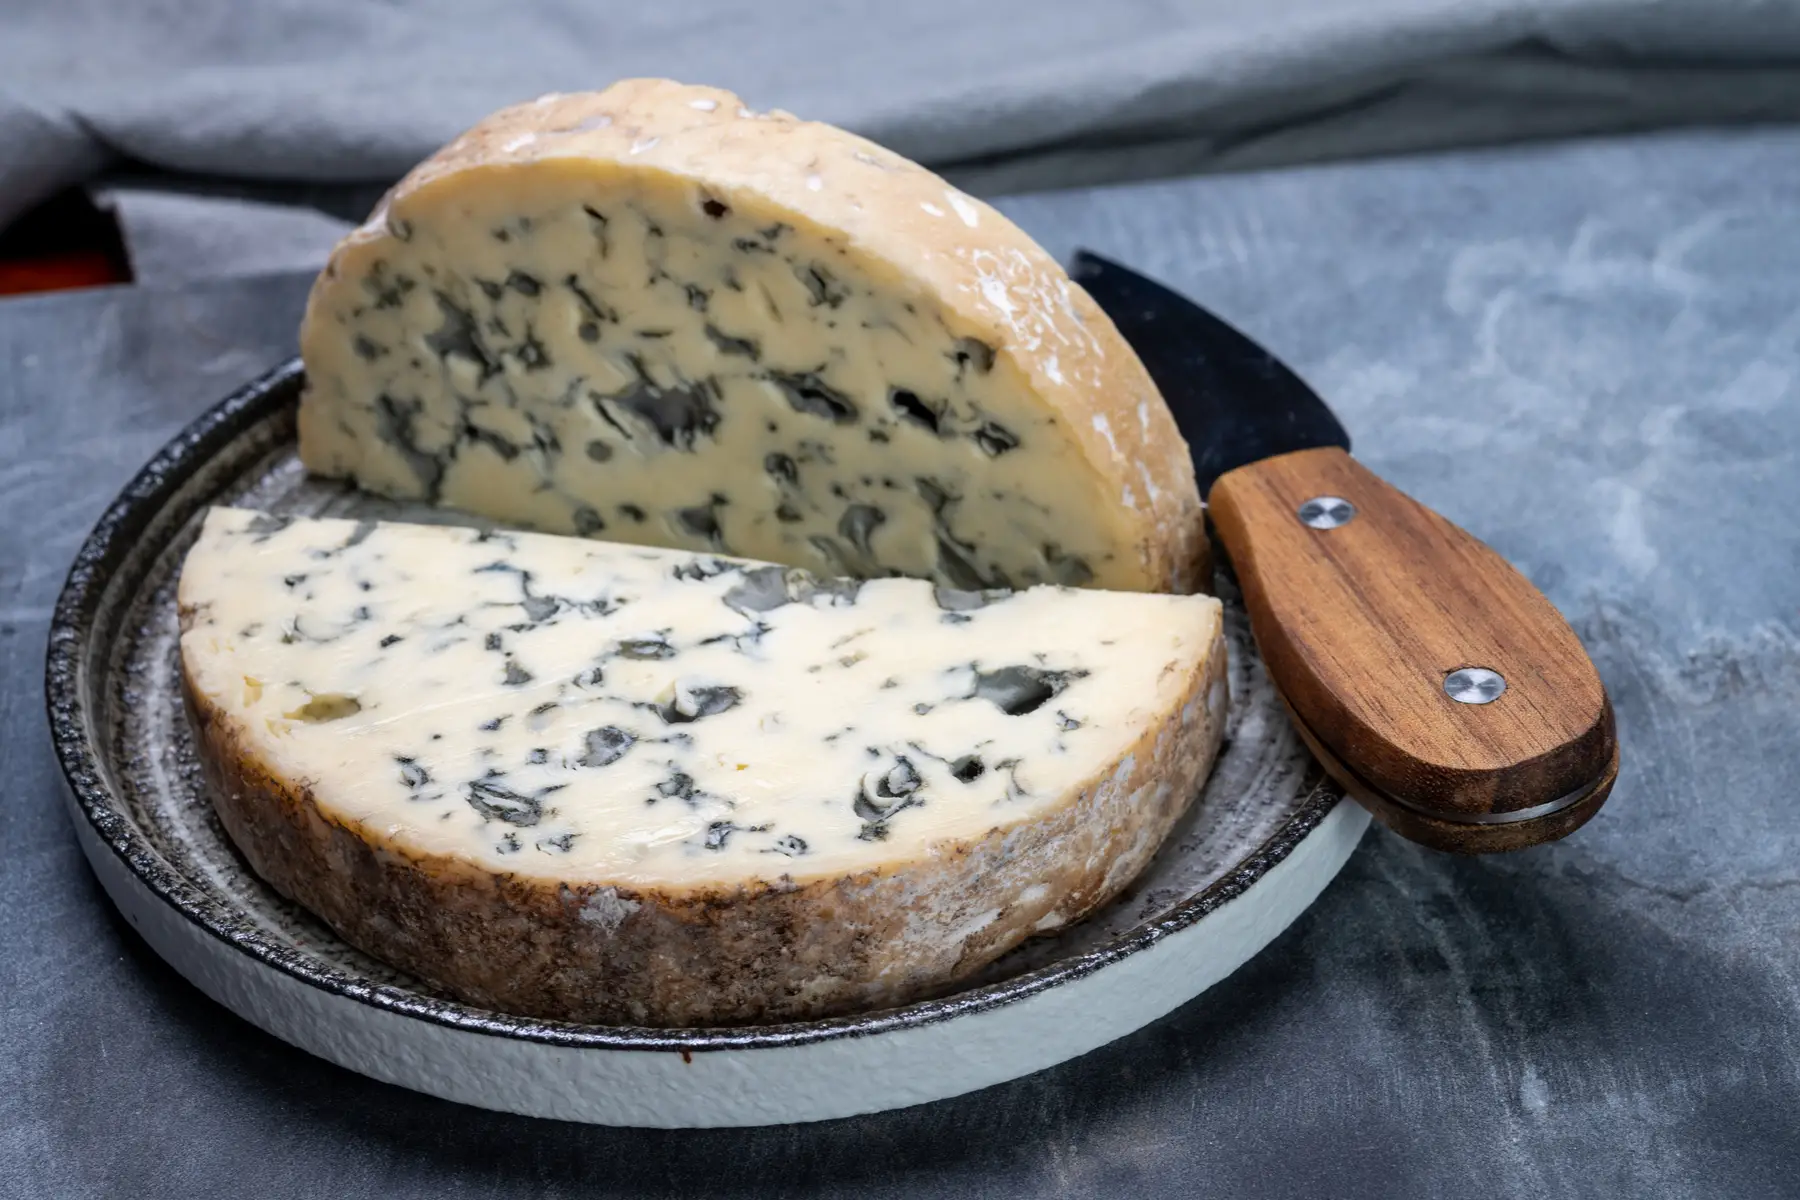 The Secret Behind Roquefort - my Favorite Cheese - France Travel Info  France Travel Info